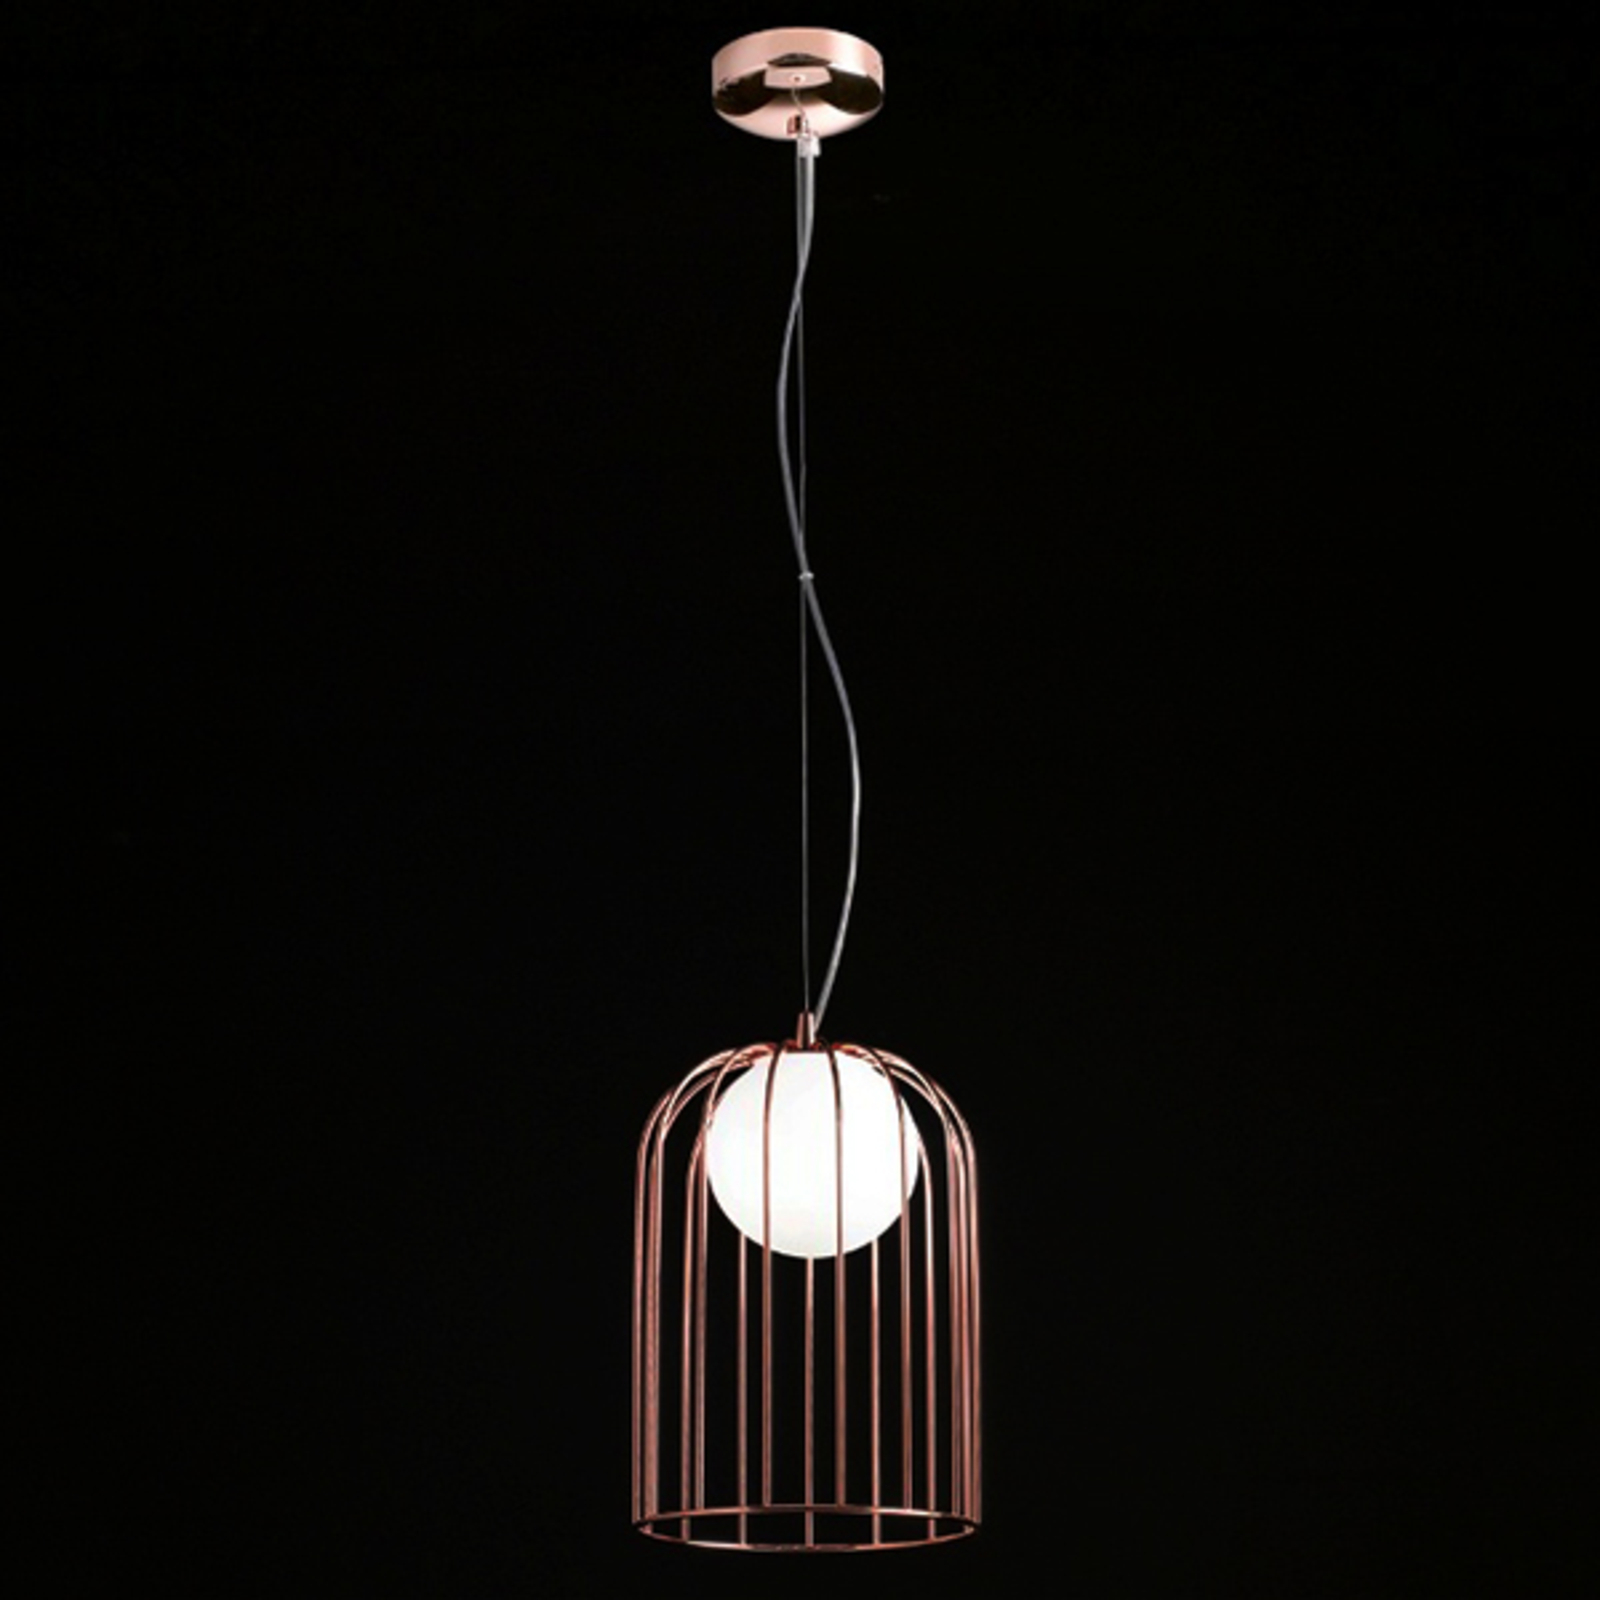 Small Kluvi pendant light with copper shade